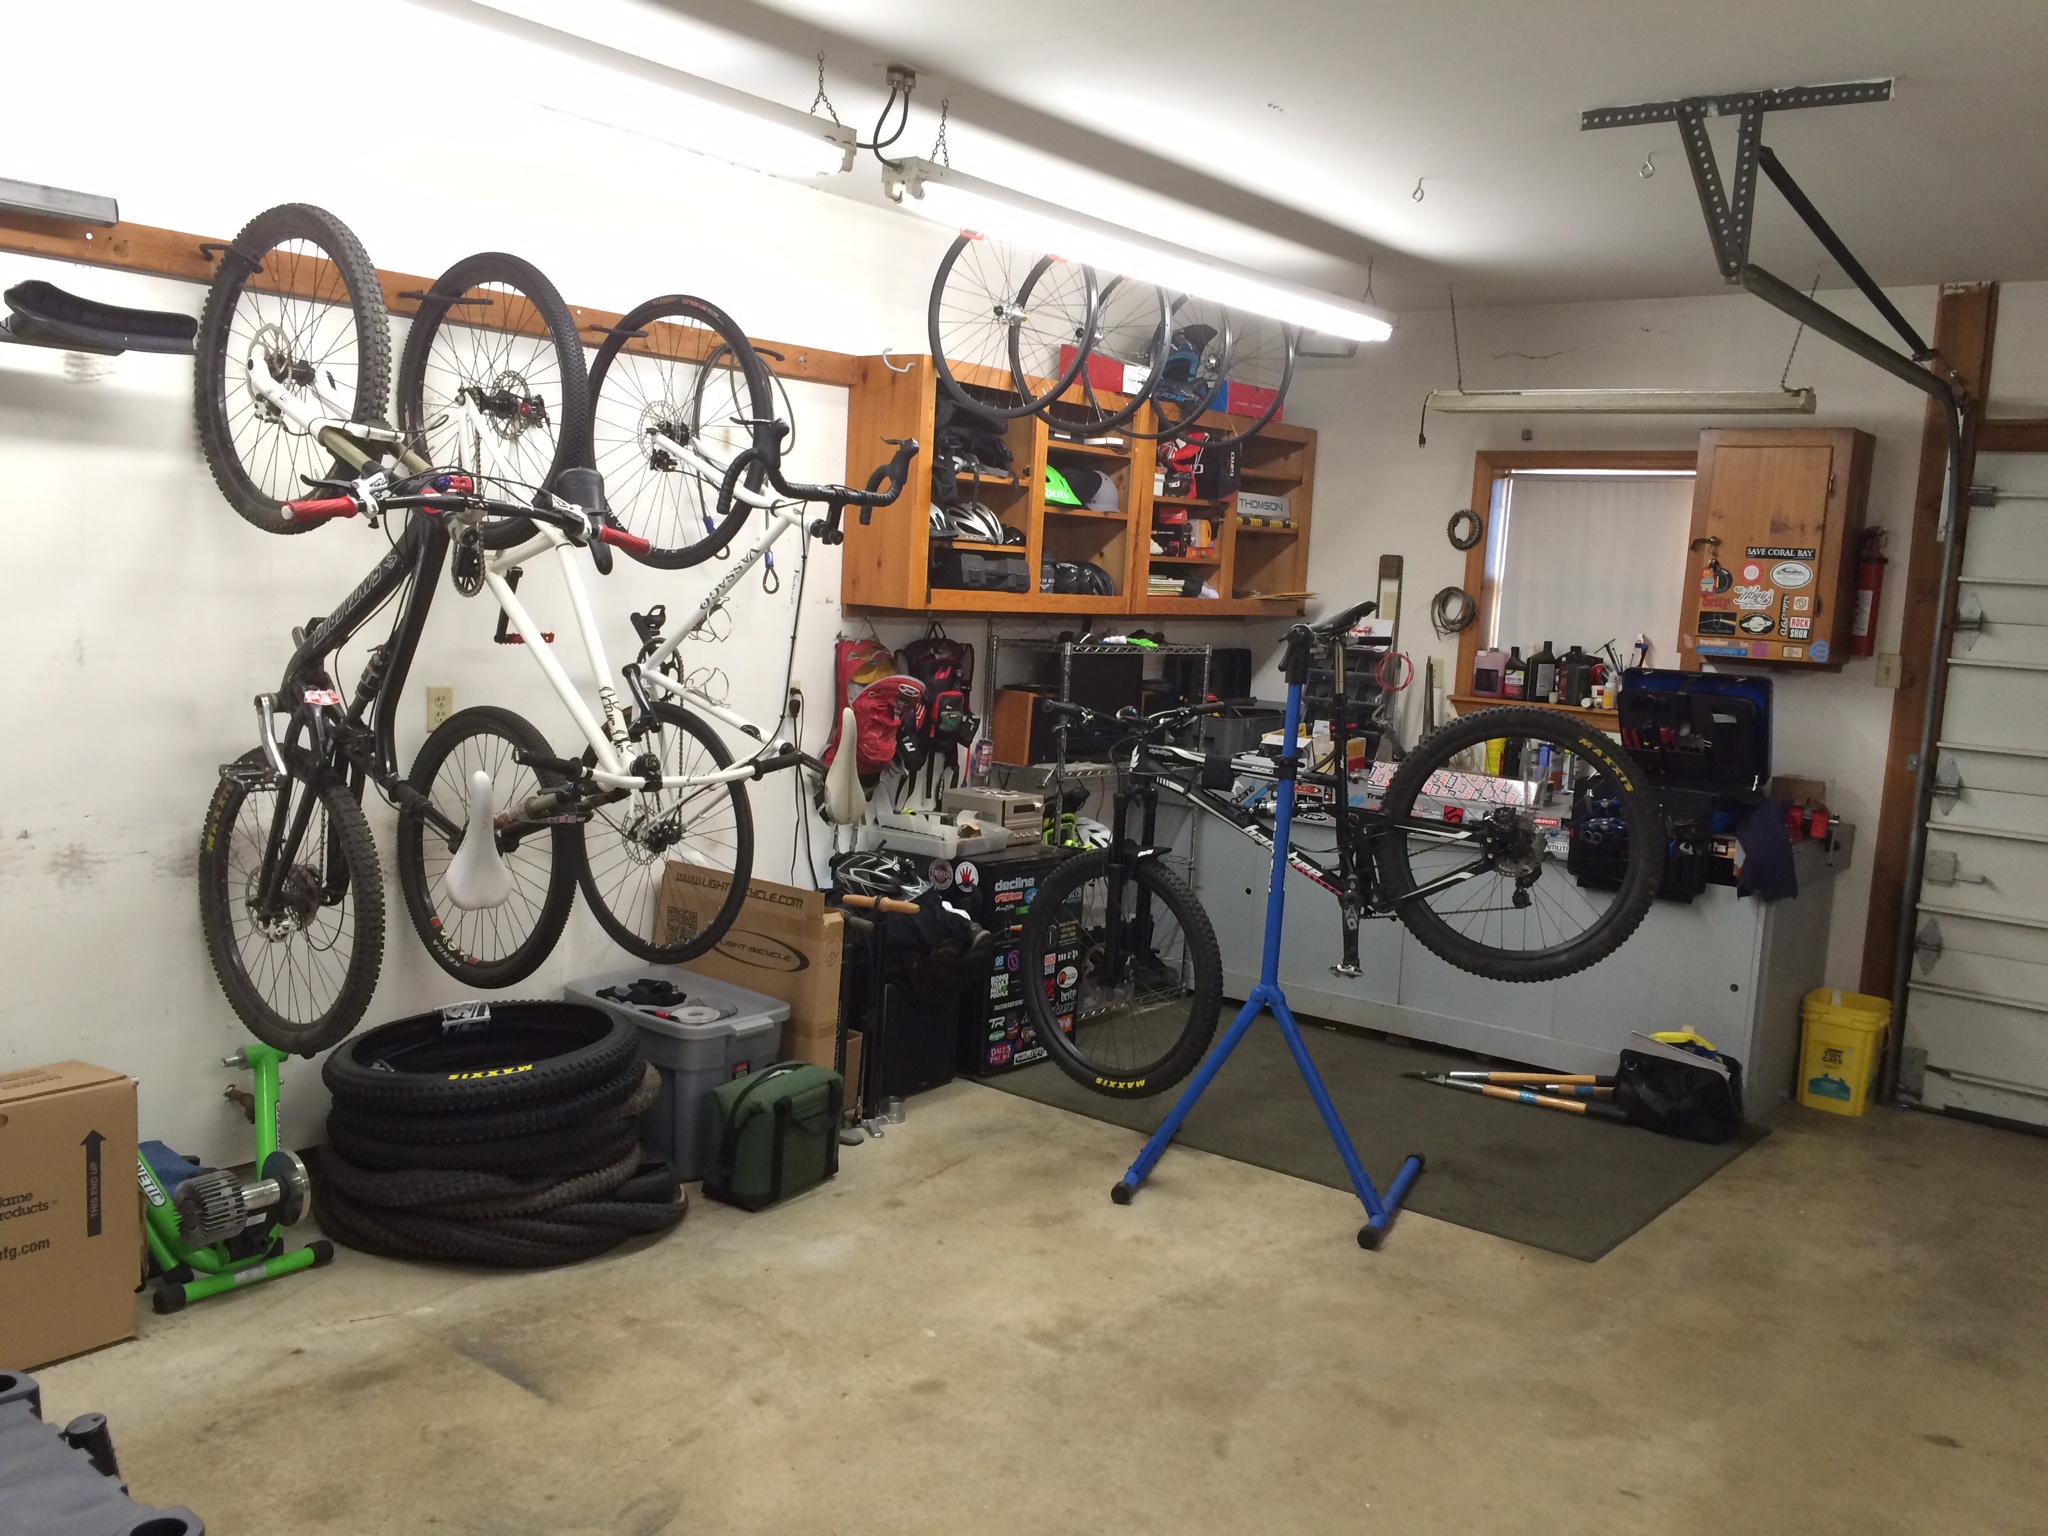 best way to store bicycles in garage